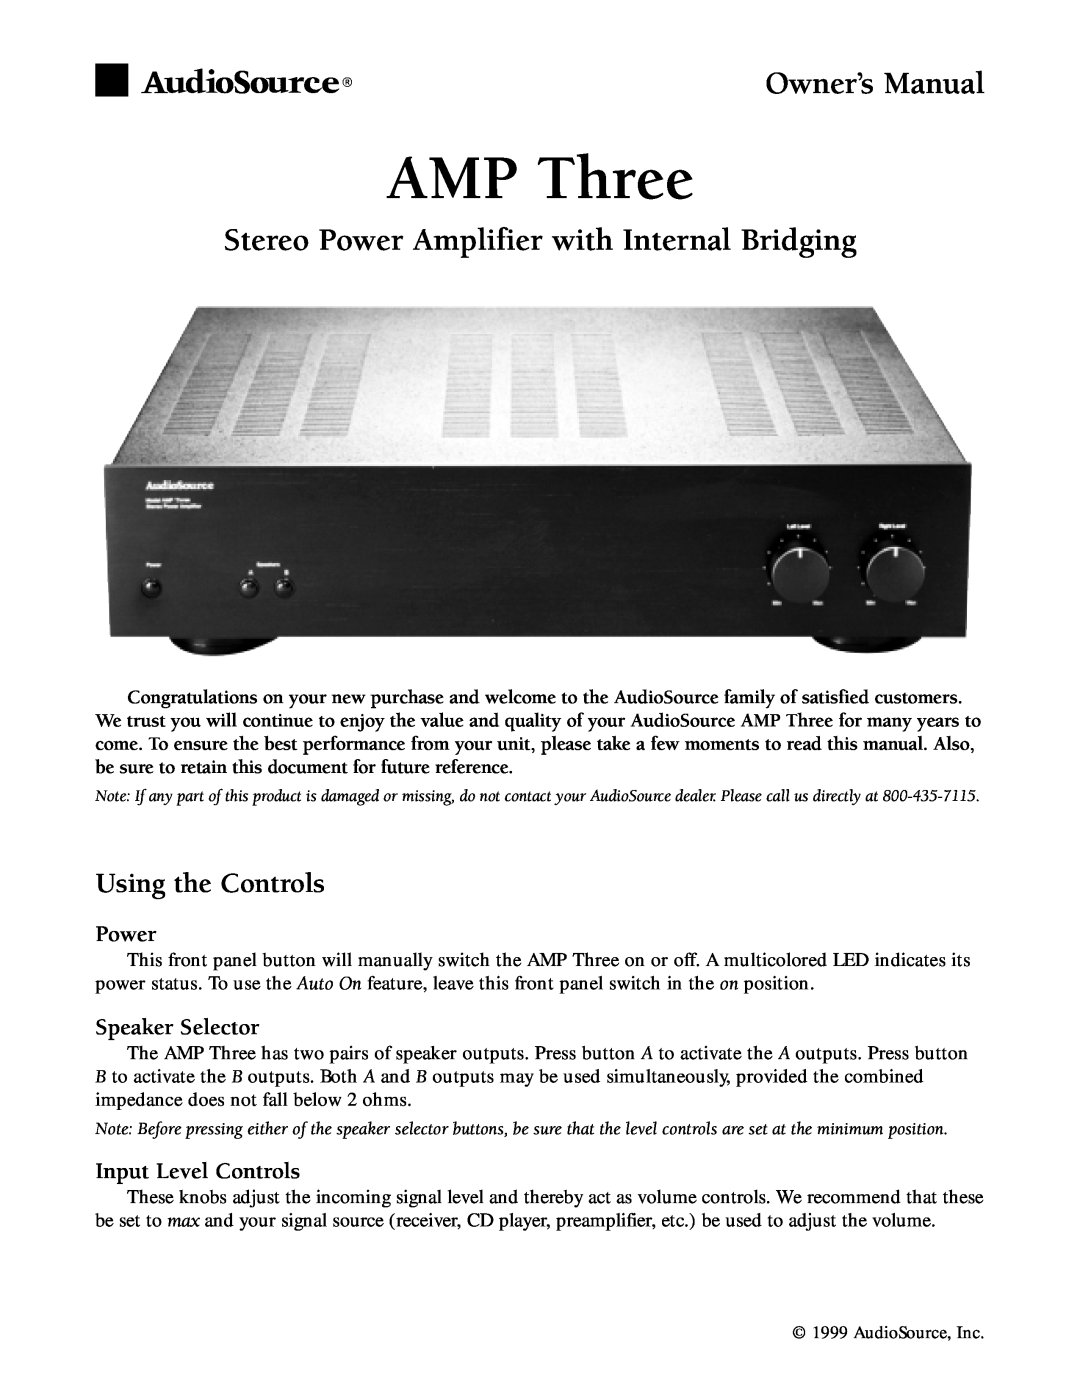 AudioSource AmpThree owner manual Using the Controls, Power, Speaker Selector, Input Level Controls, AMP Three 